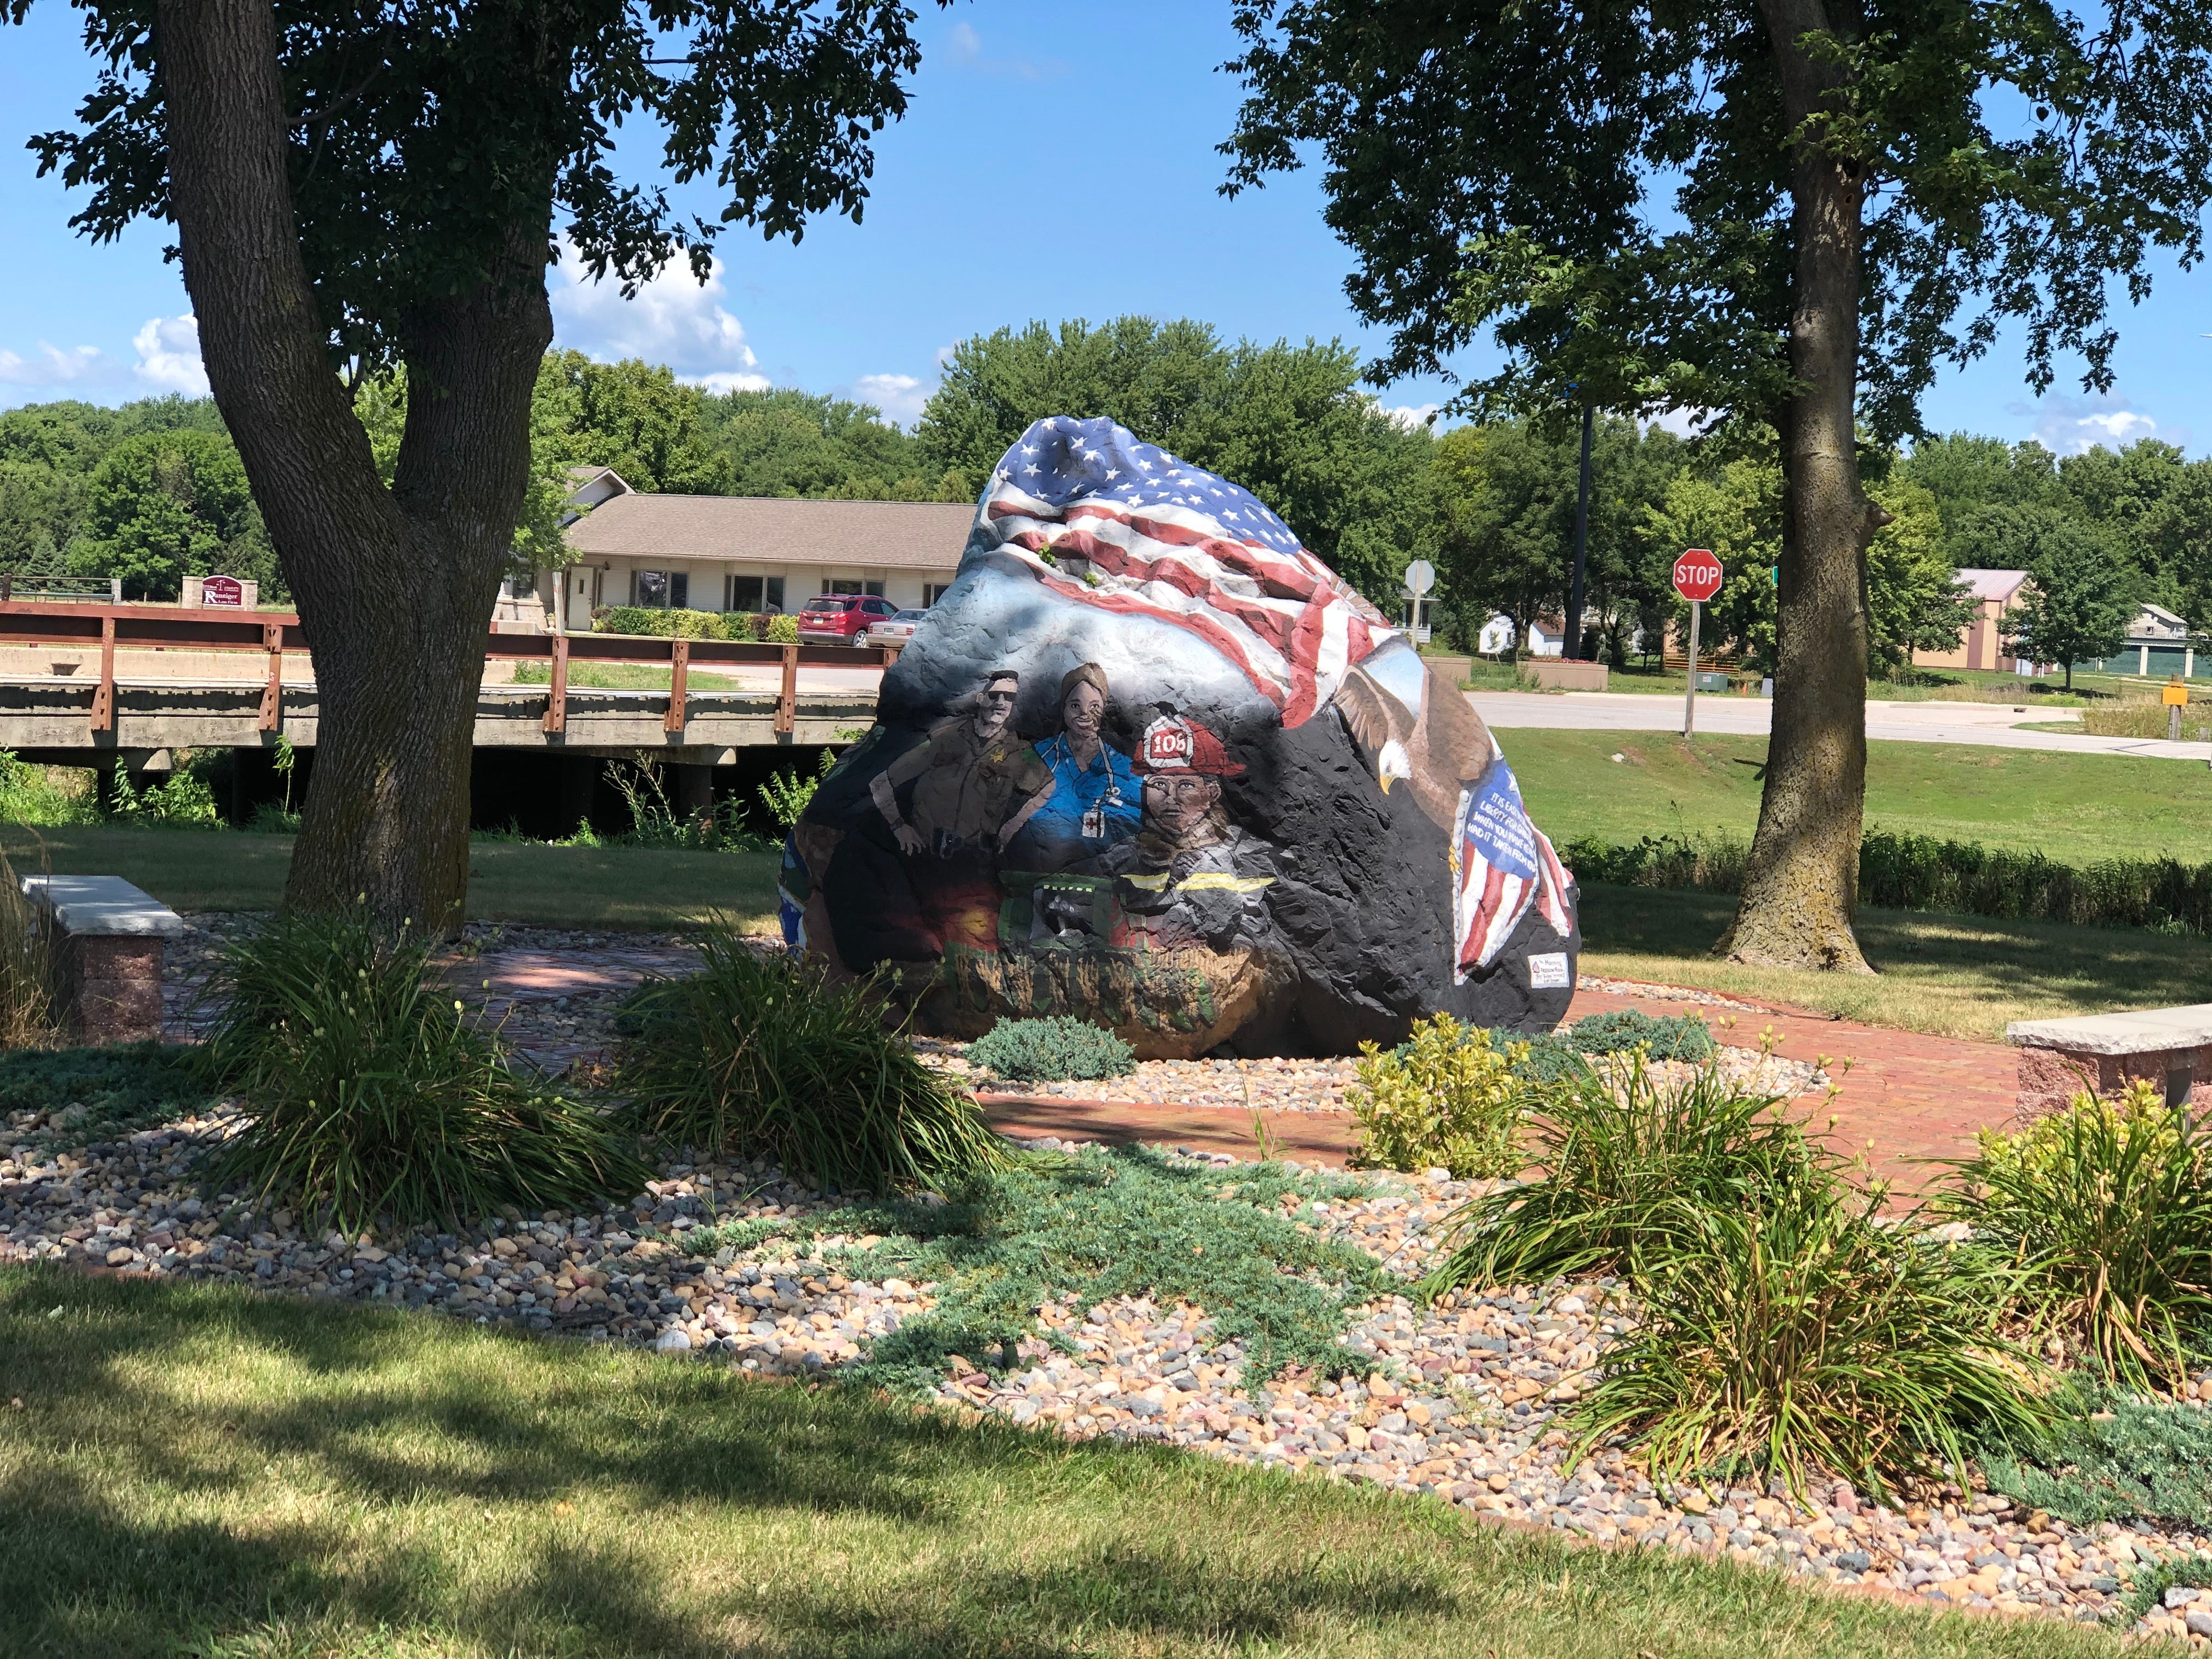 Each county in Iowa has a Freedom Rock; Carroll County's is at the corner of this campground